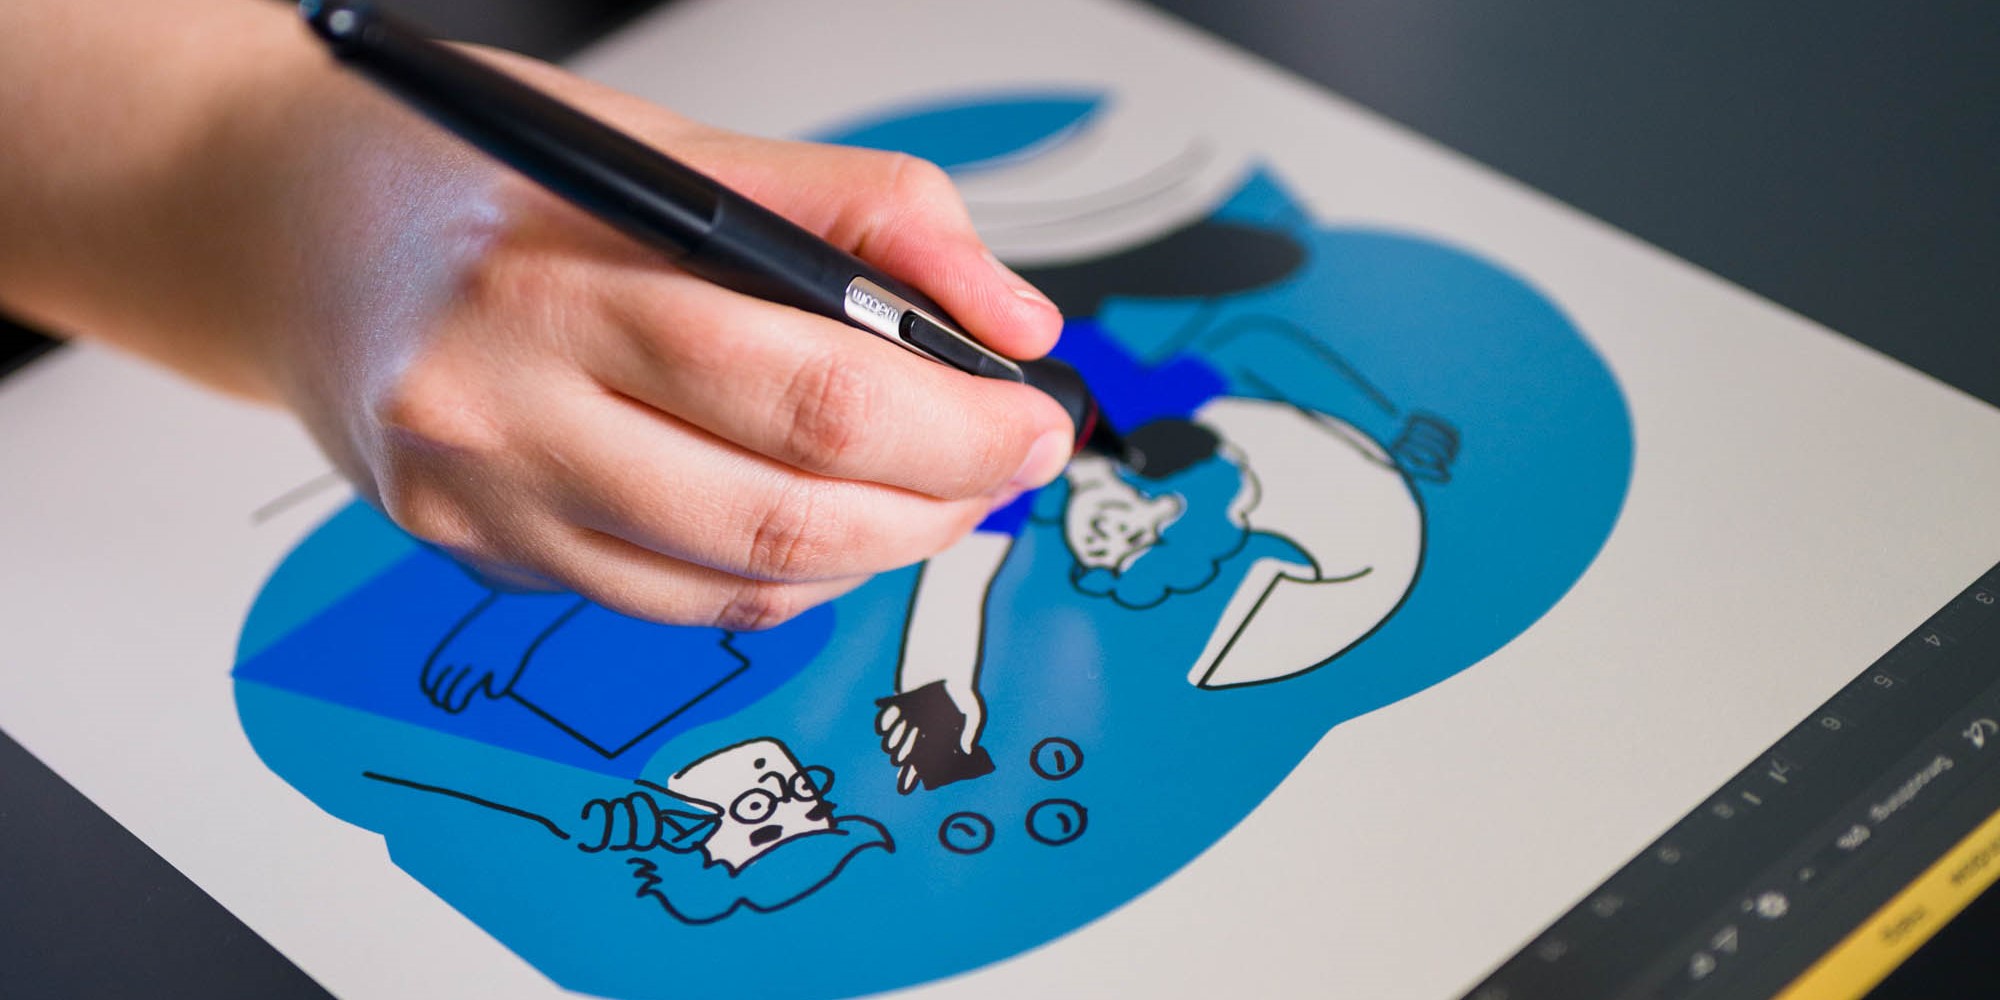 Using a wacom pen and tablet, someone draws two stylized people usings various shades of blue